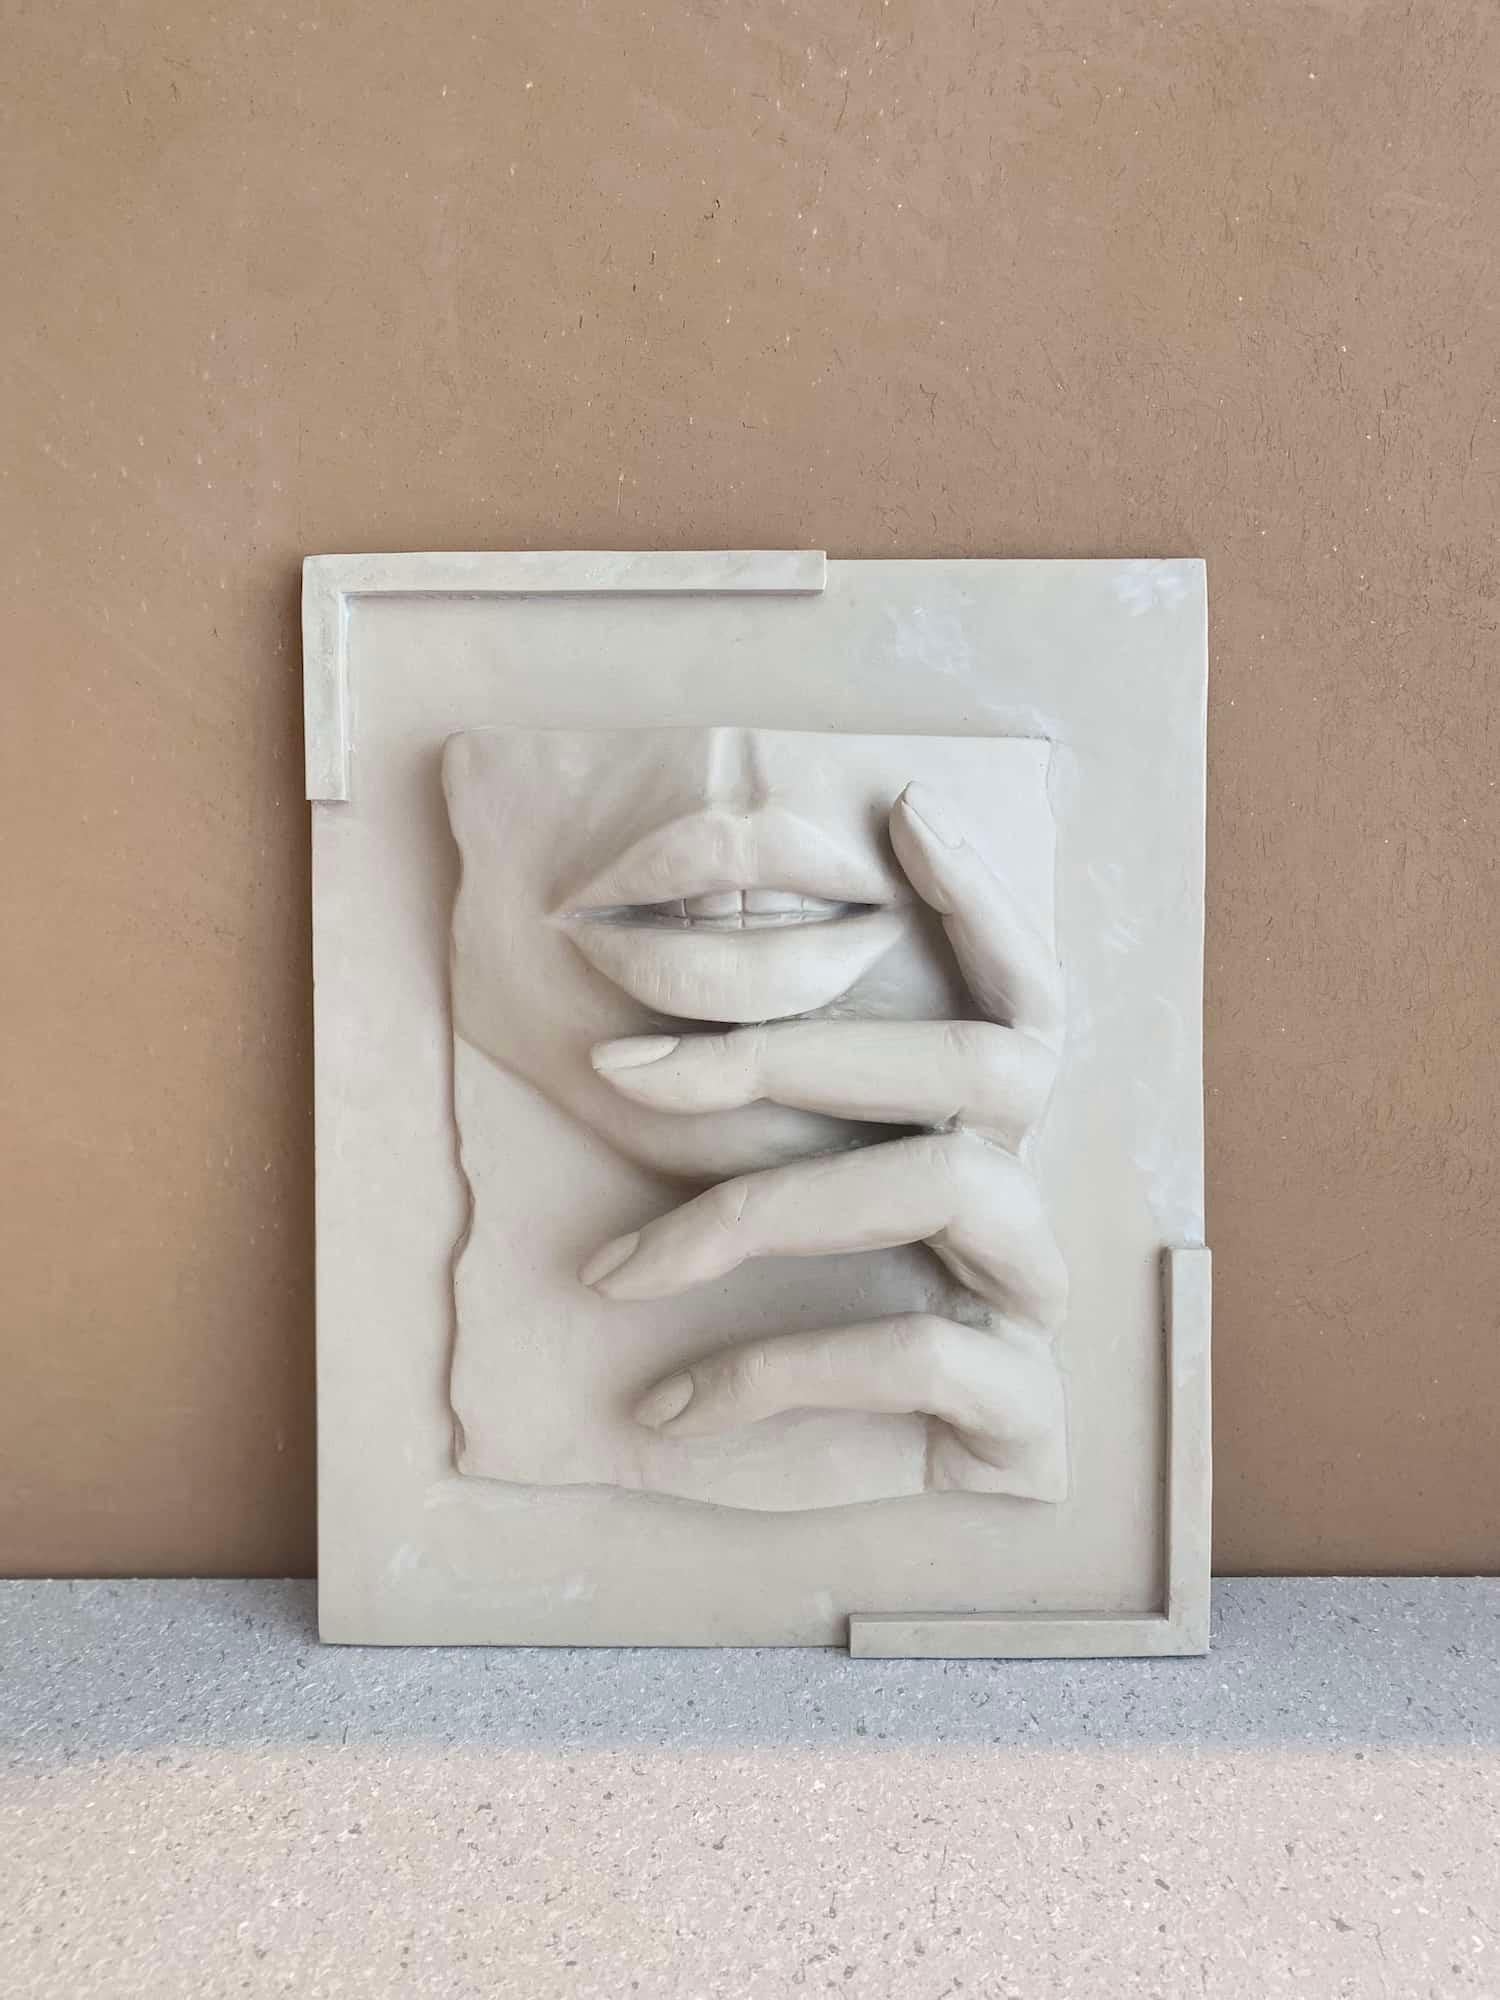 Object No.23 wall piece by Marcela Cure
Dimensions: W 40 x D 11 x H 62 cm
Materials: Resin and Stone Composite

This collection is inspired by the delicate curves of the female body, displaying soothing pieces that evoke effortless